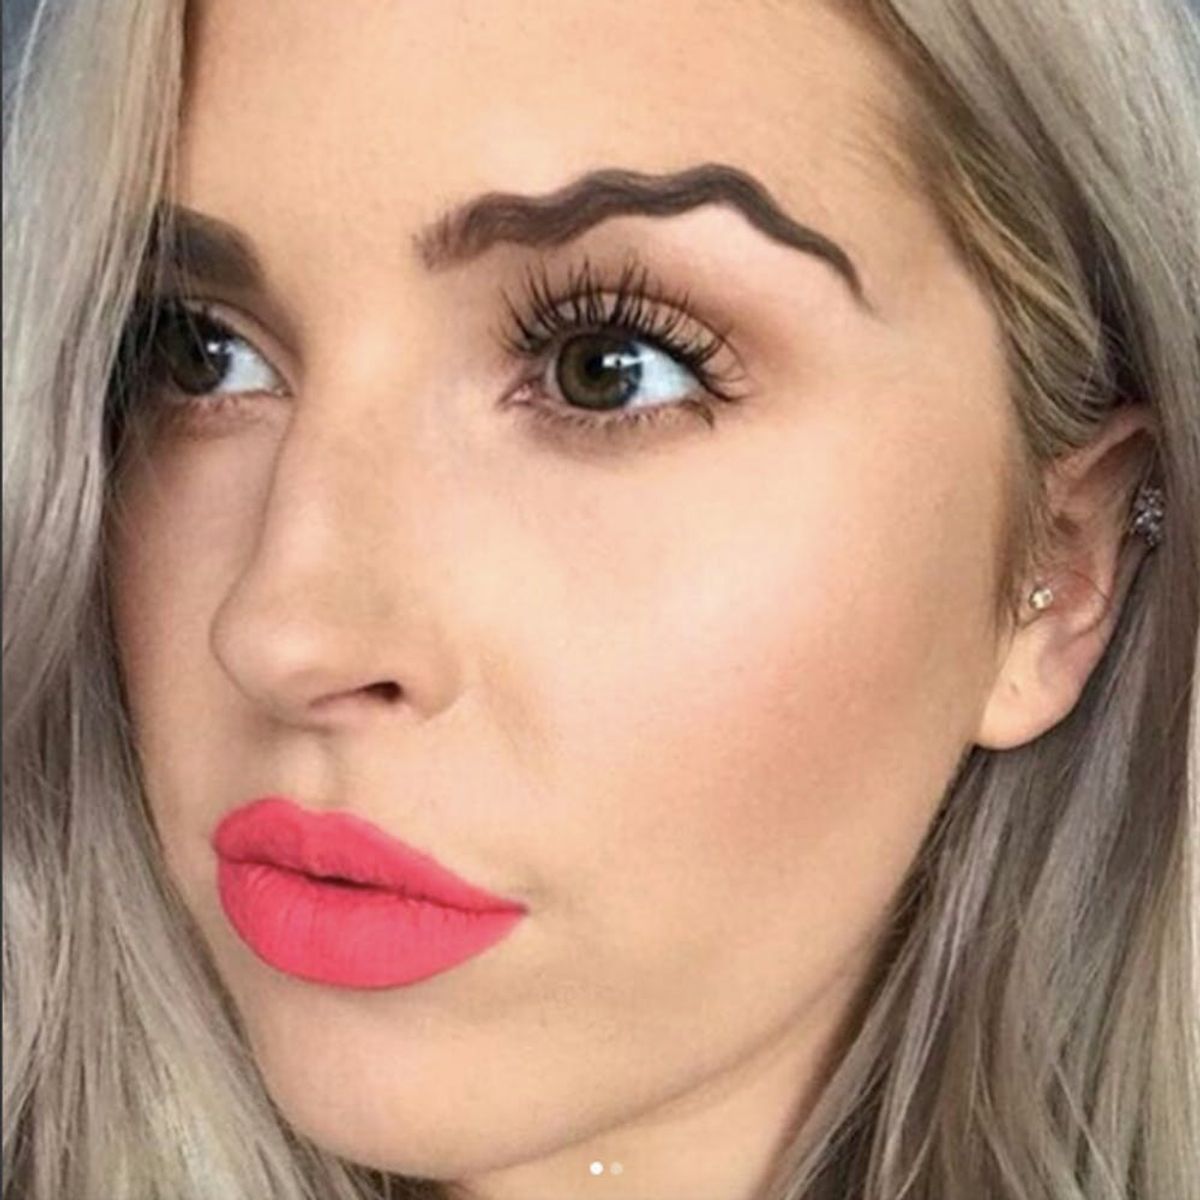 The Most Viral Eyebrow Trends, from Tamest to Wildest